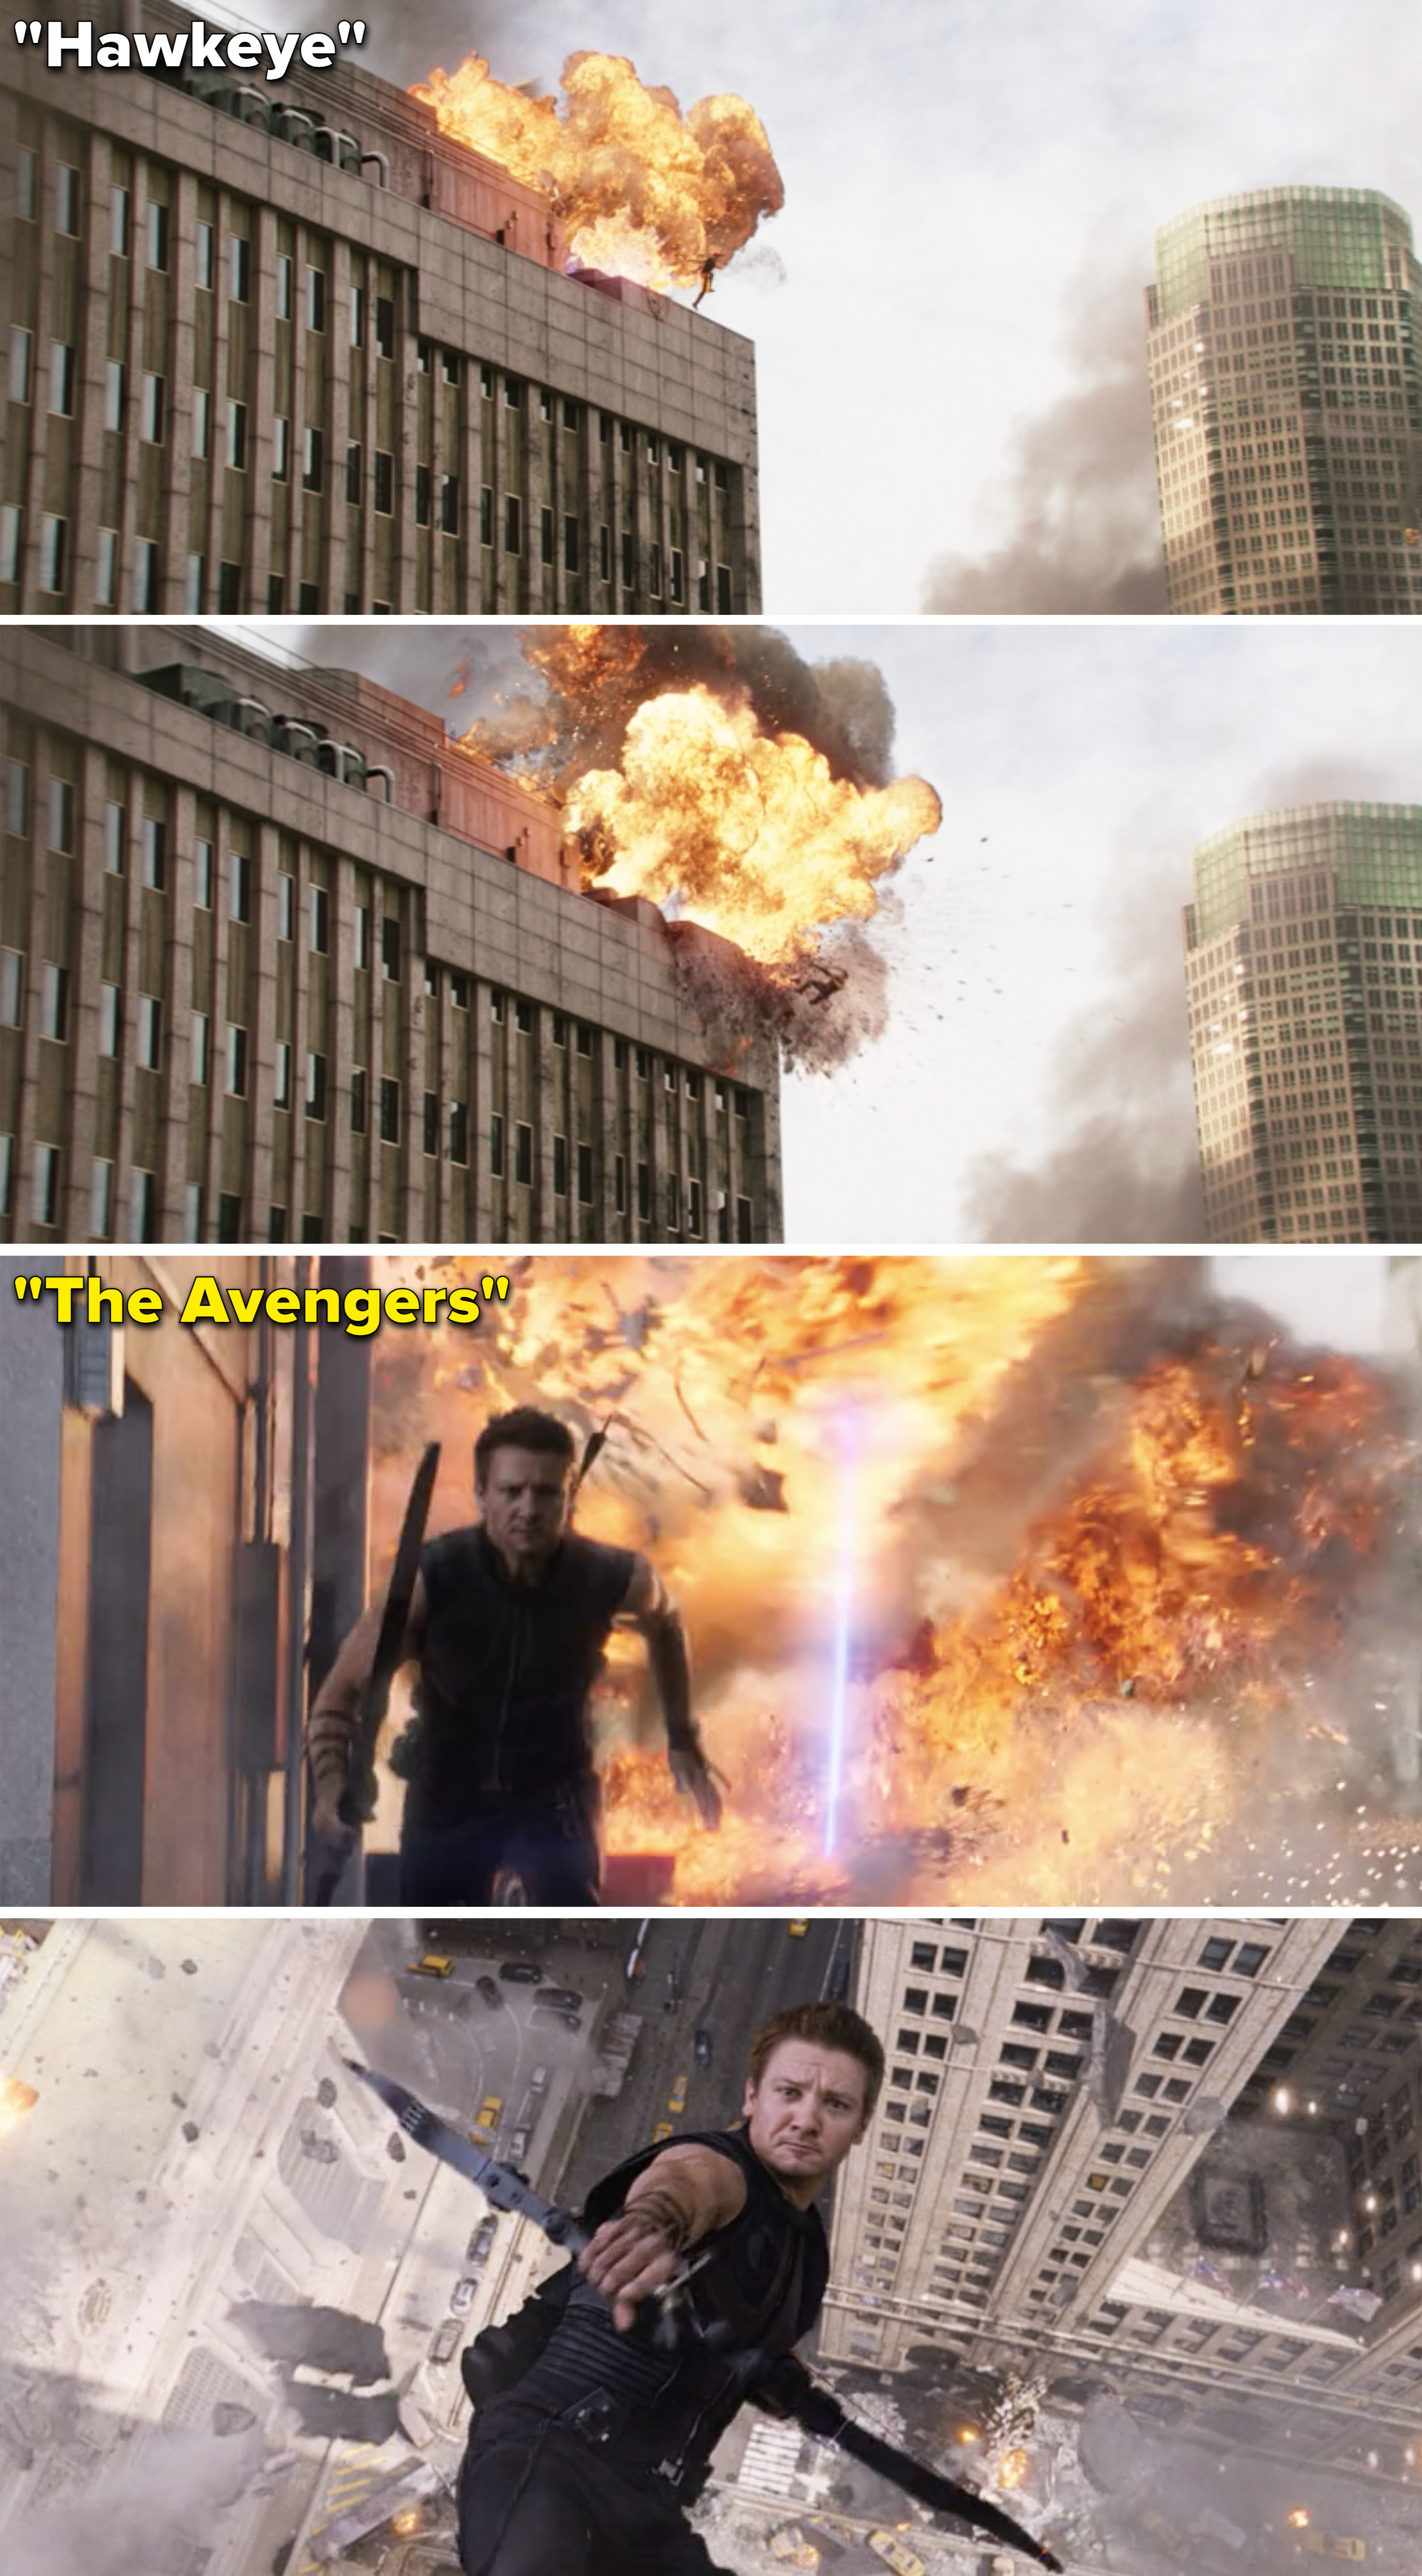 Side by sides of a building blowing up vs. close ups of Hawkeye jumping off the building